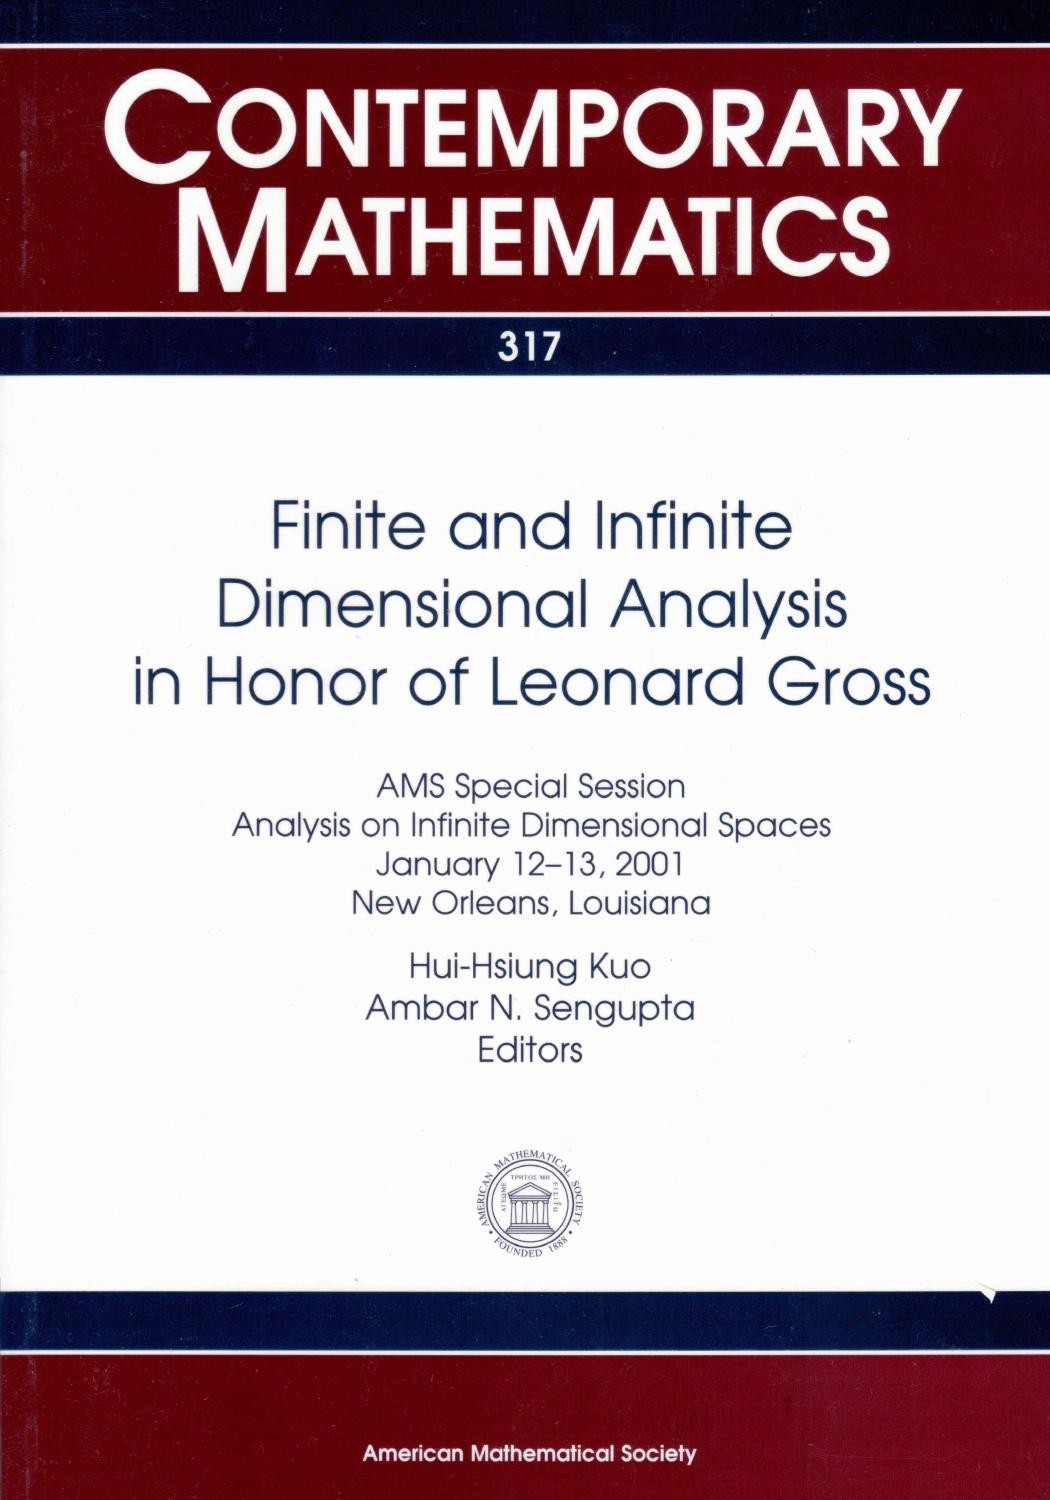 Finite and Infinite Dimensional Analysis in Honor of Leonard Gross: AMS Special Session Analysis on Infinite Dimensional Spaces, January 12-13, 2001, New Orleans, Louisiana